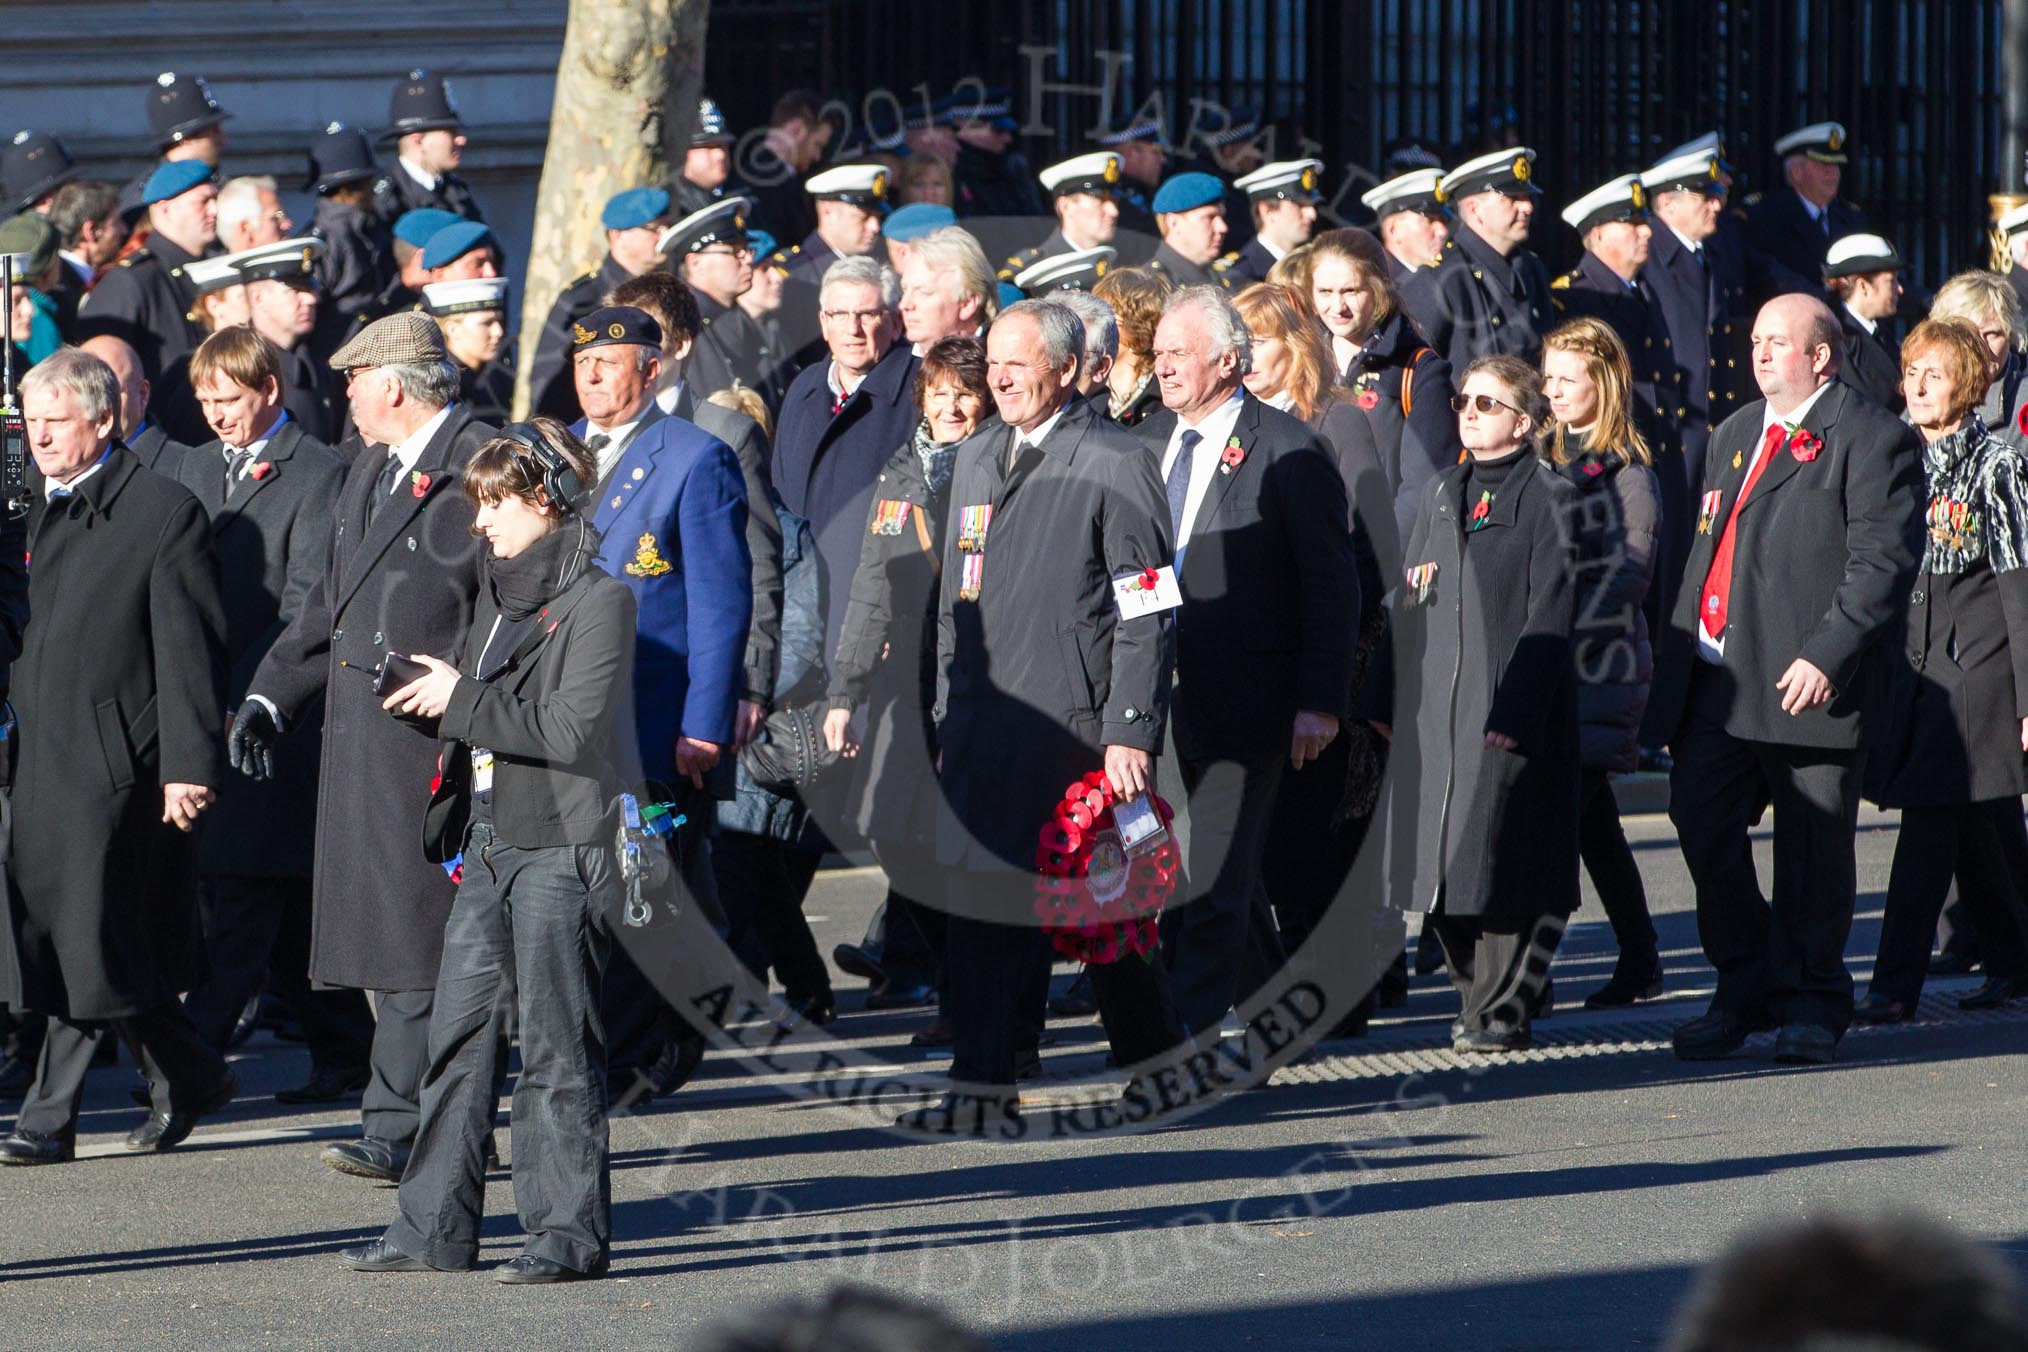 Remembrance Sunday 2012 Cenotaph March Past: Group F4 - Showmens' Guild of Great Britain..
Whitehall, Cenotaph,
London SW1,

United Kingdom,
on 11 November 2012 at 11:45, image #405